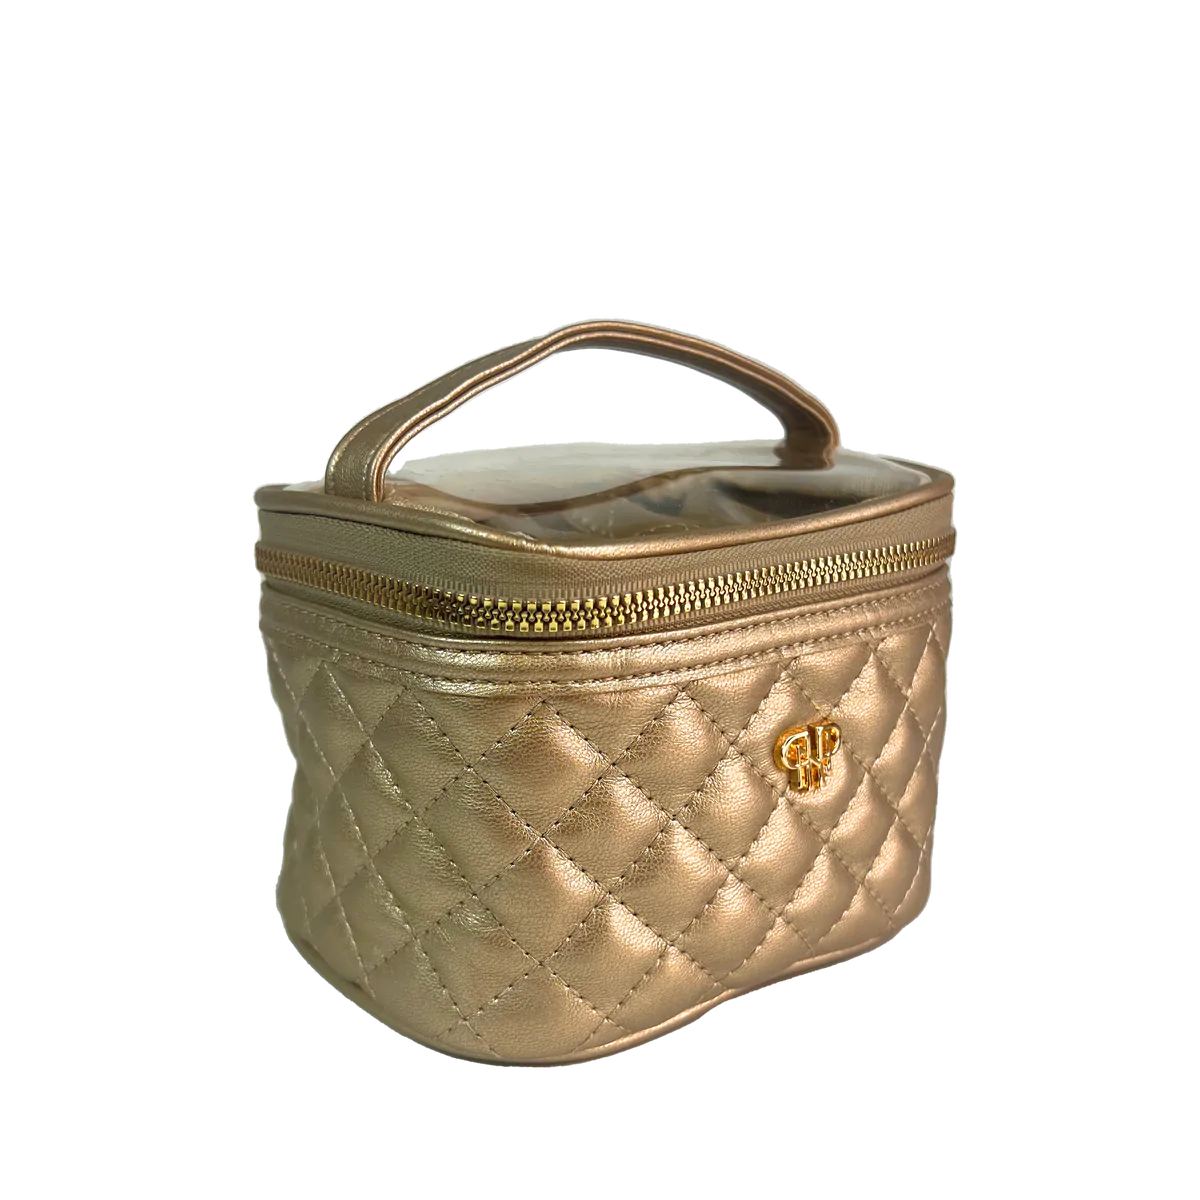 GETAWAY JEWELRY CASE - GOLD QUILTED